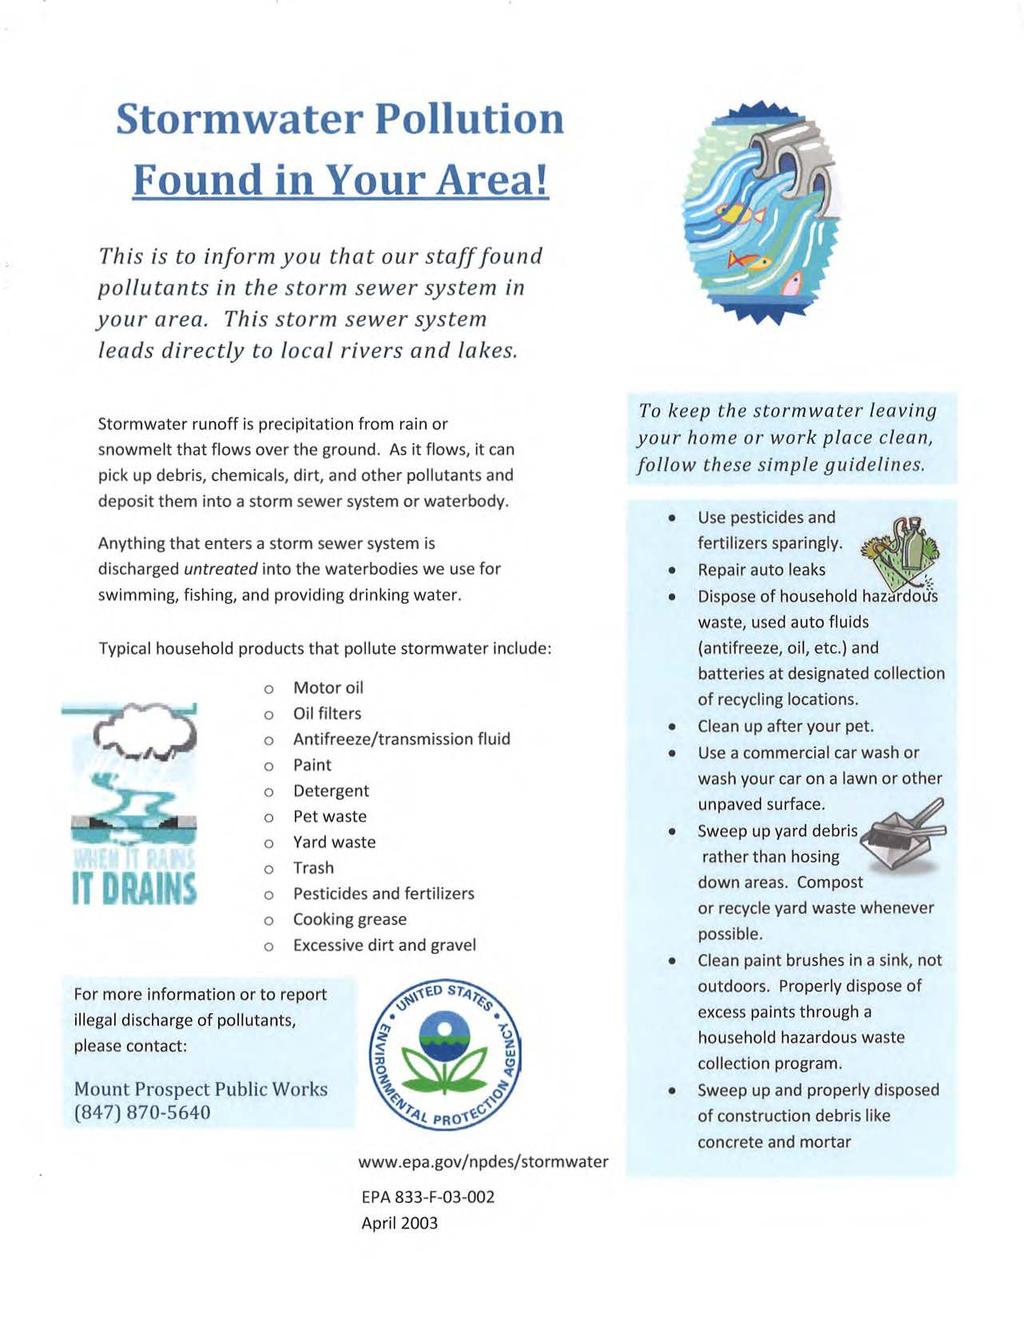 Stormwater Pollution Found in Your Area! This is to inform you that our staff found pollutants in the storm sewer system in your area. This storm sewer system leads directly to local rivers and lakes.